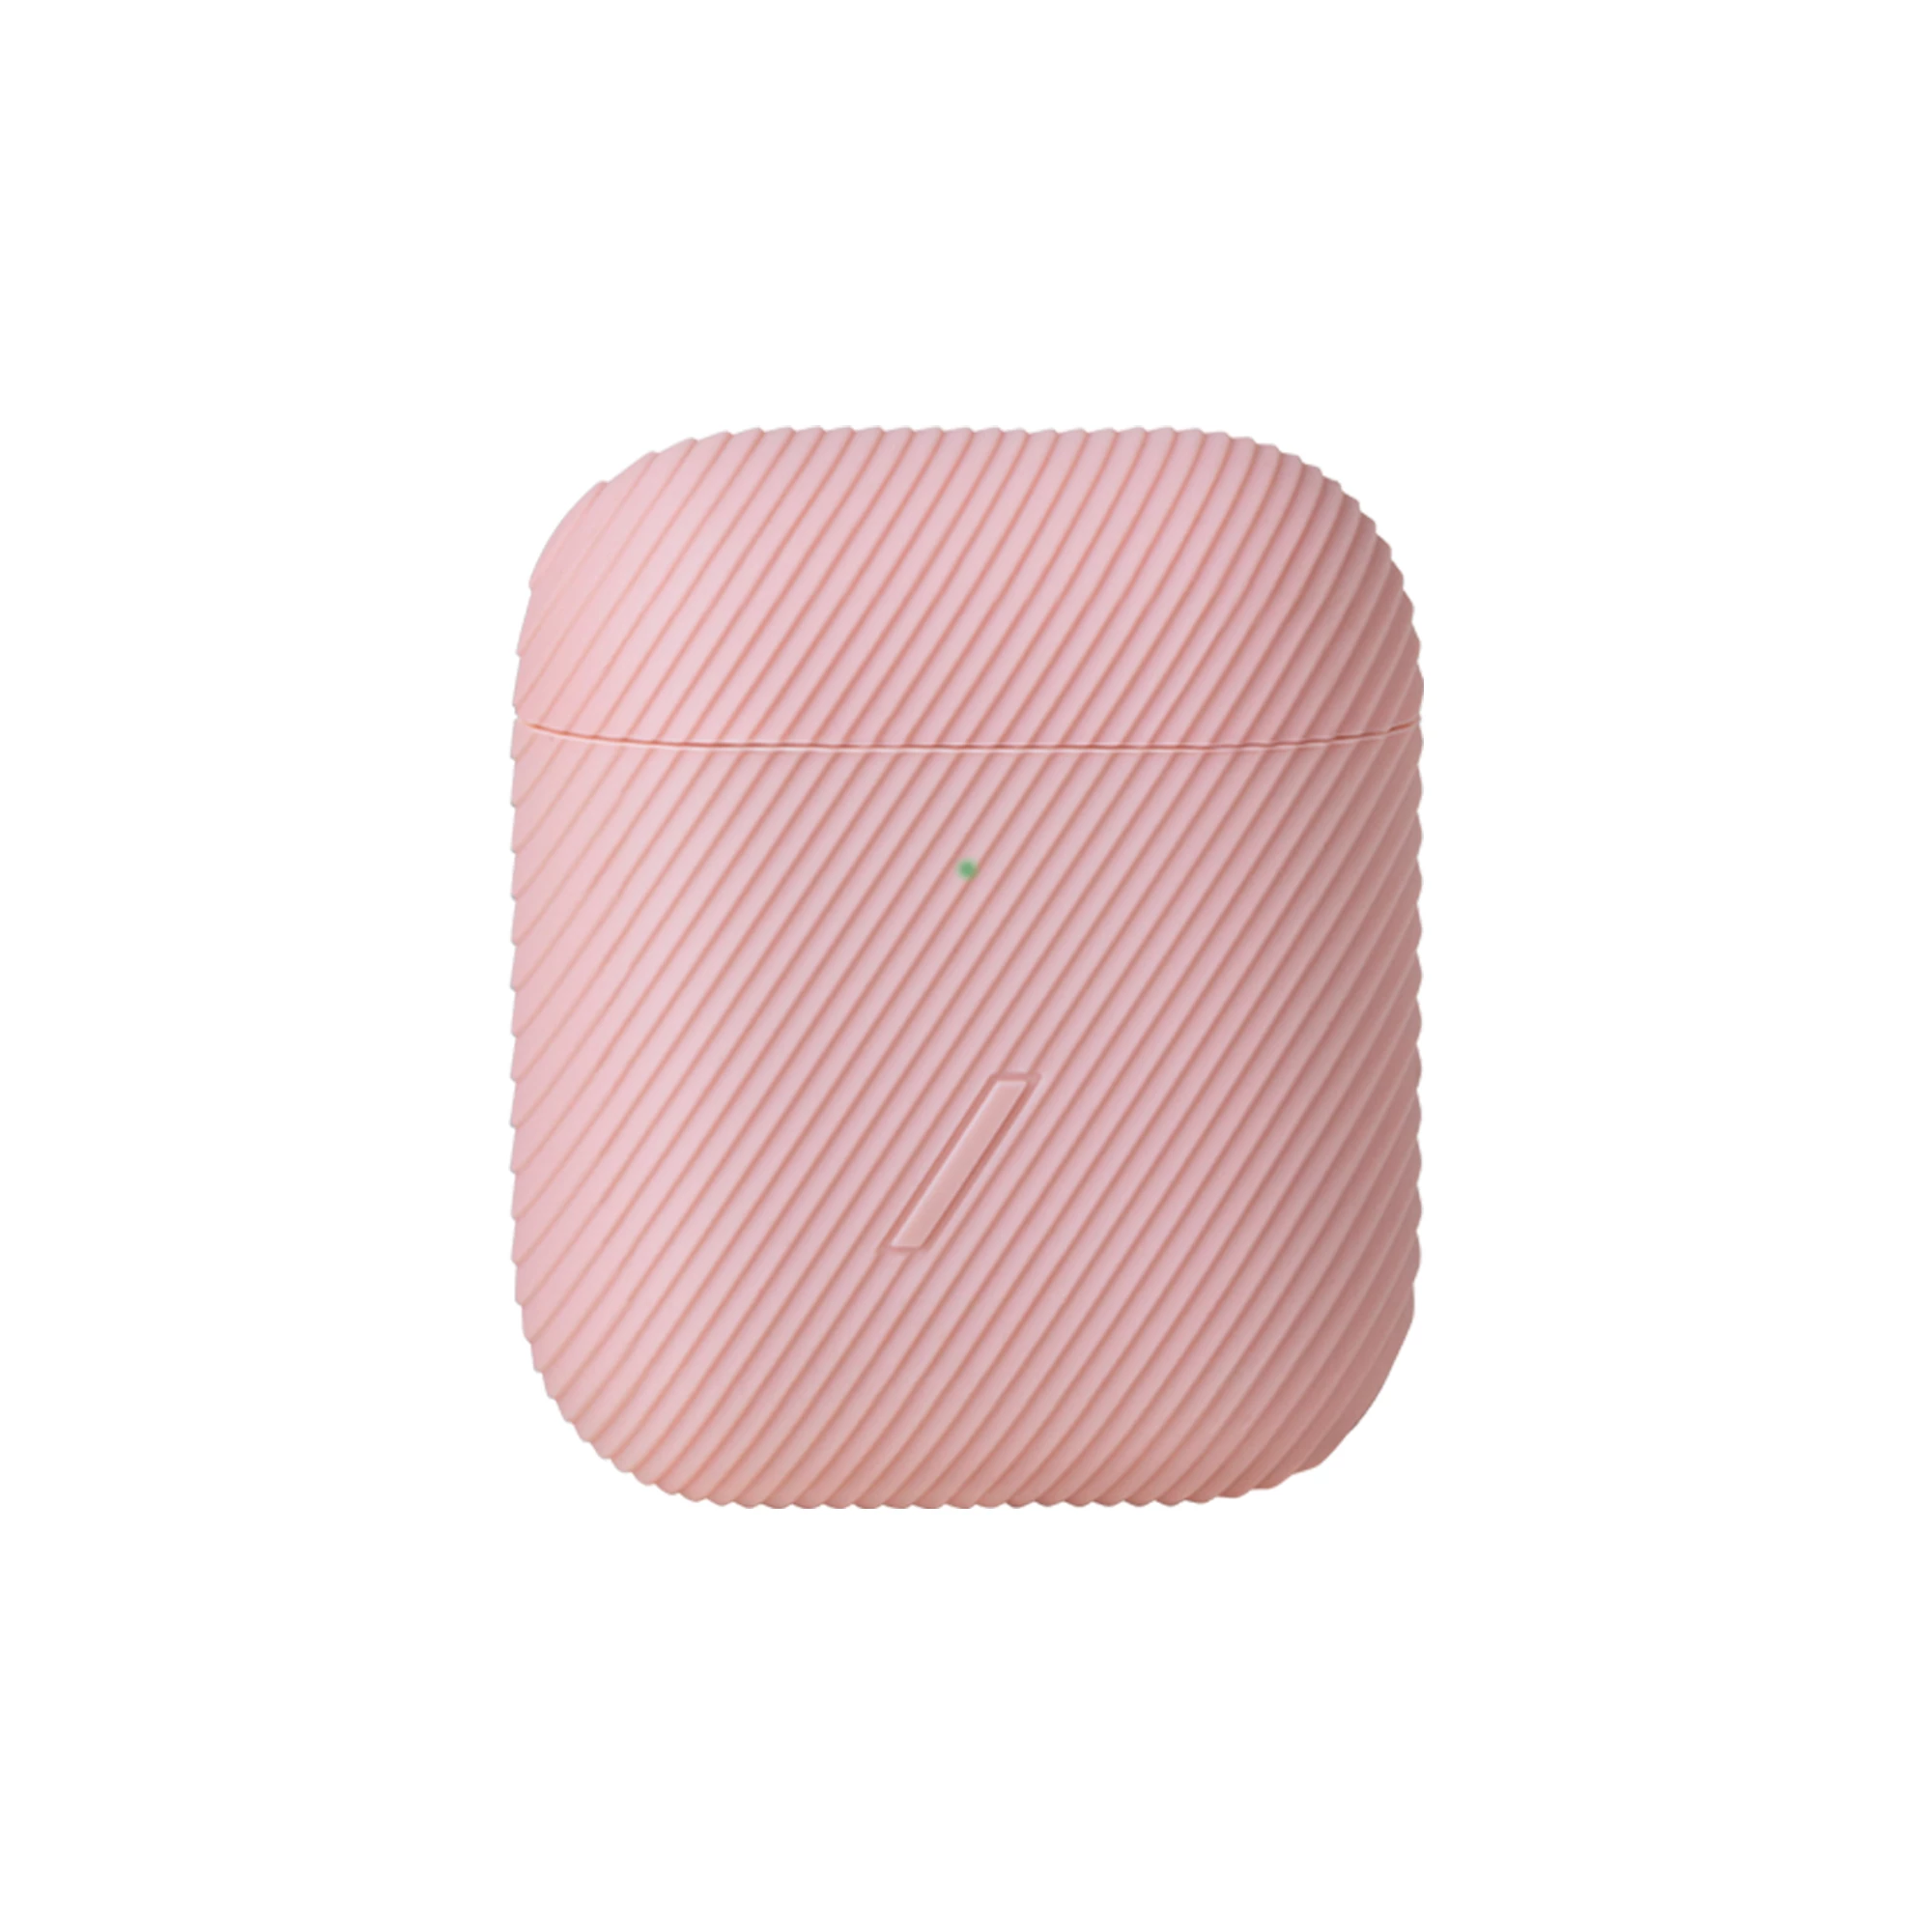 Native Union Curve Case Rose for Airpods (APCSE-CRVE-ROS)